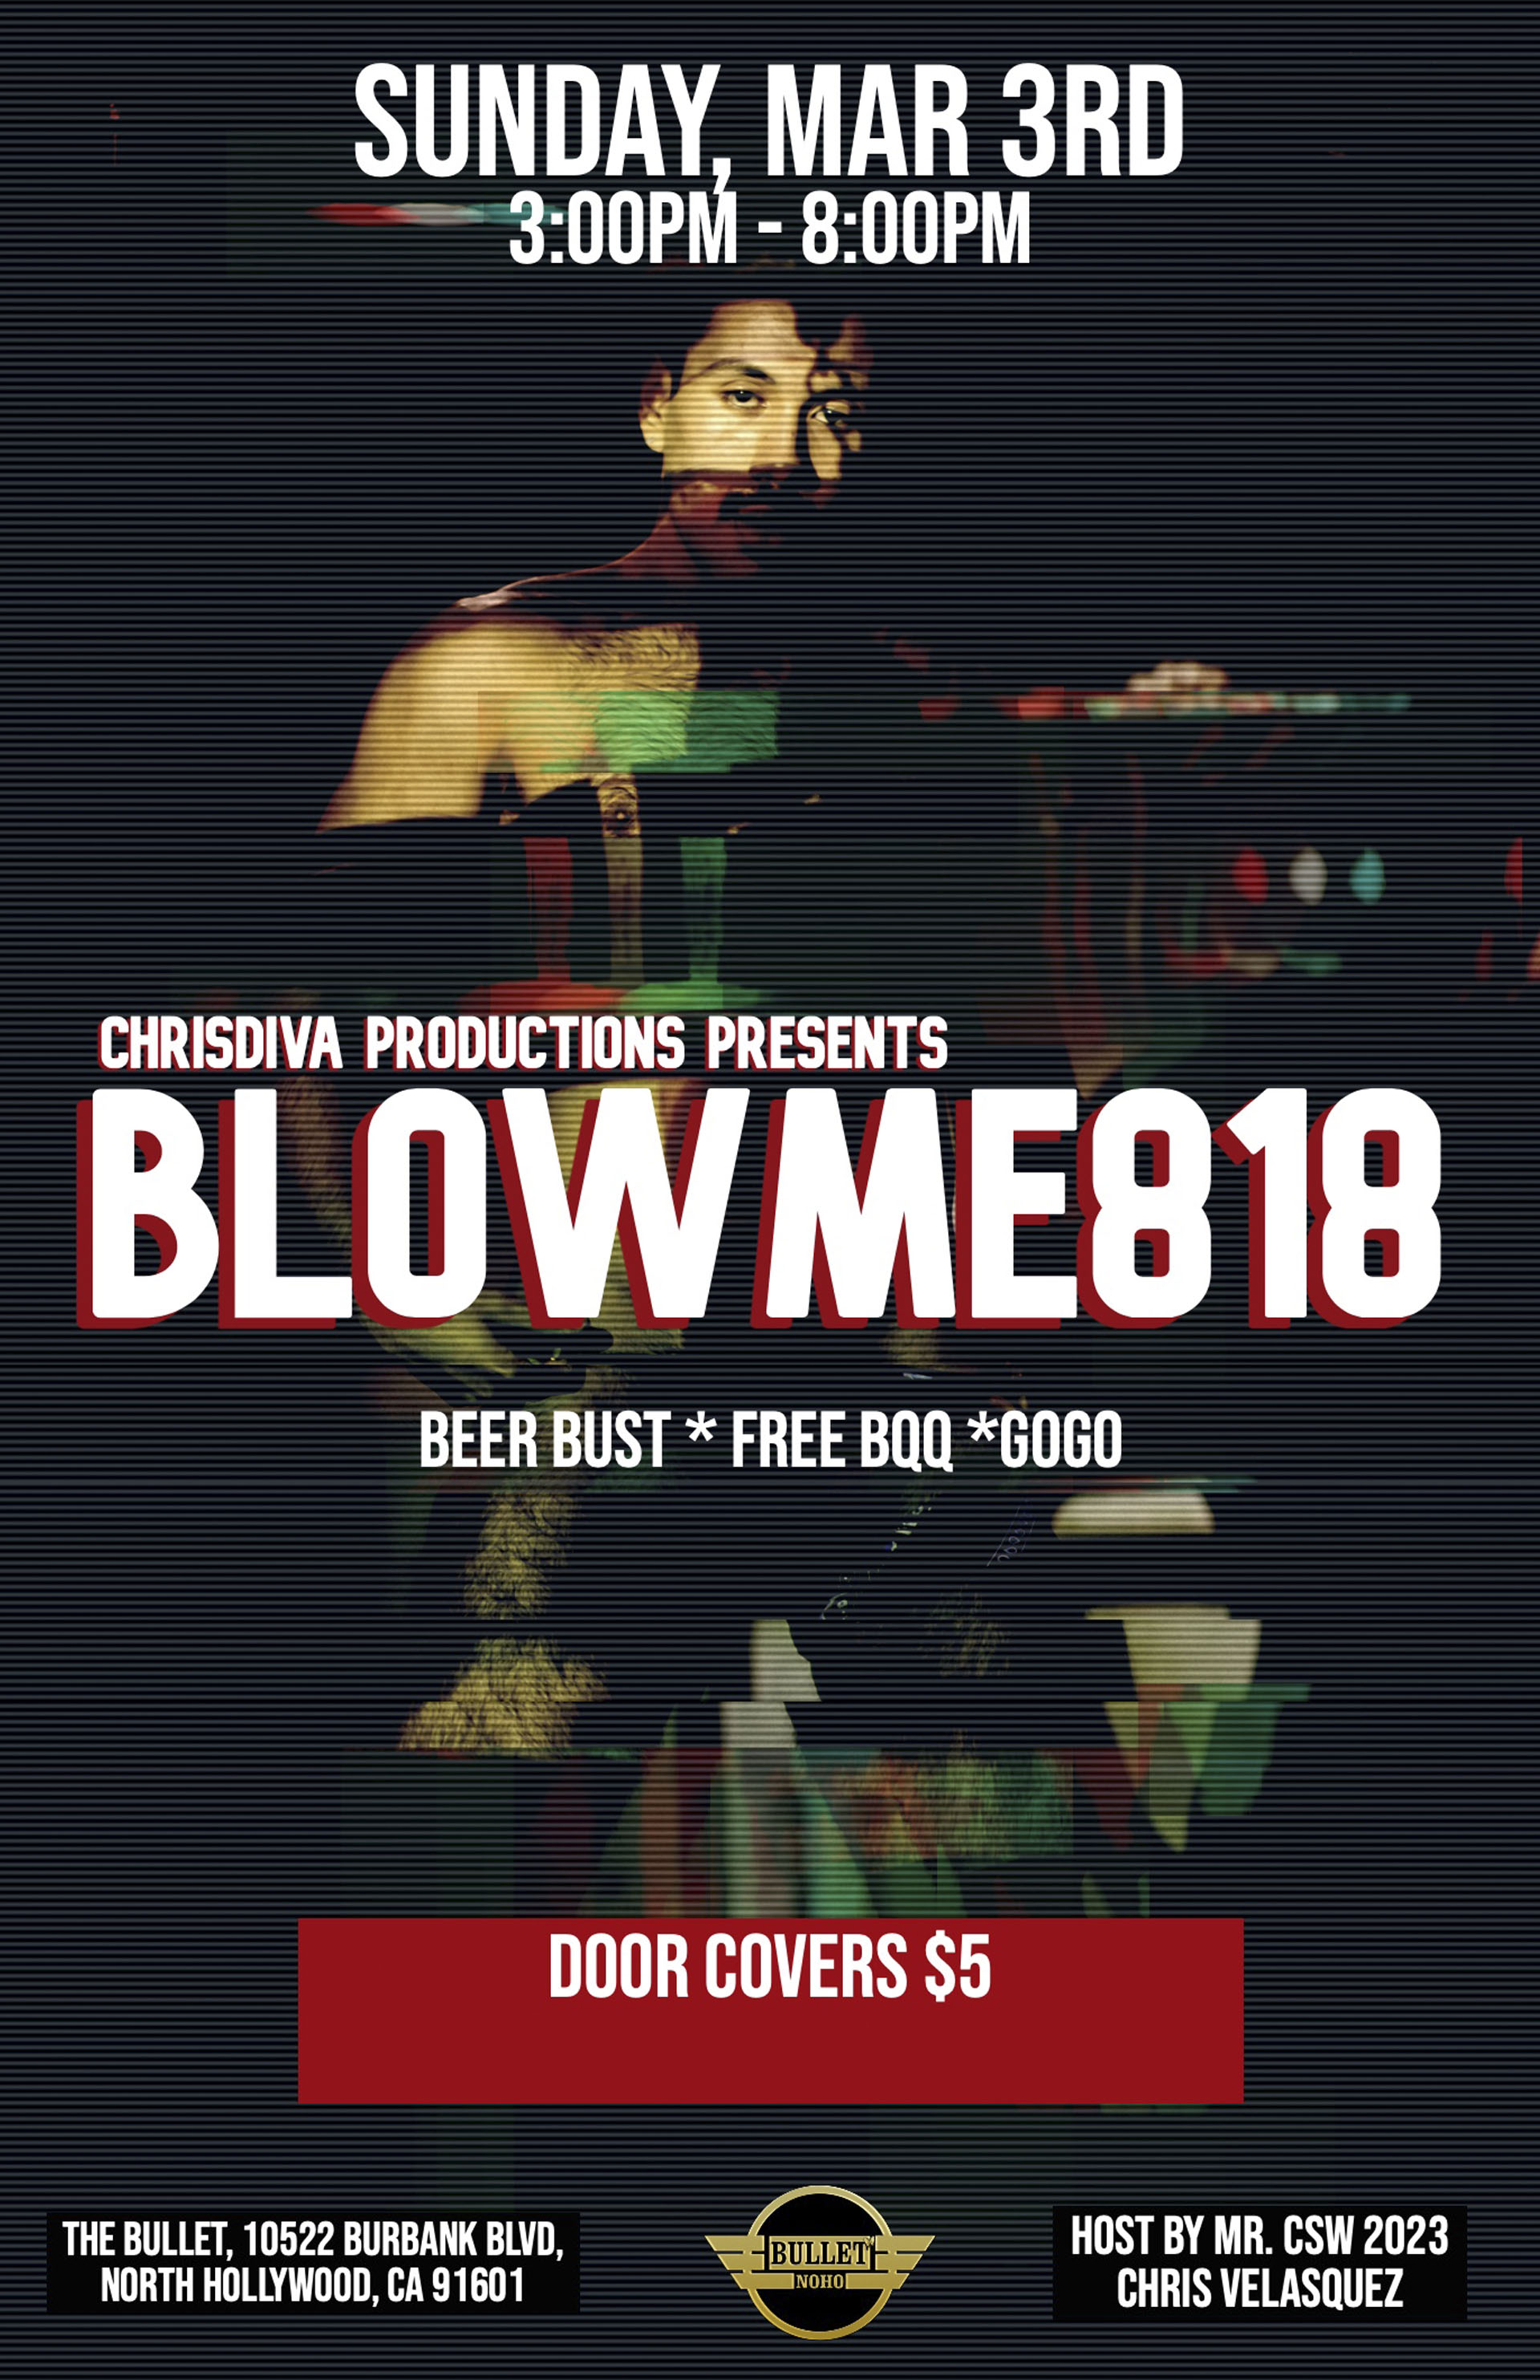 BLOWME818 Hosted by MR. CSW 2023, Christopher Velasquez: Sunday, 03/03/24 from 3PM-8PM. Featuring DJ CMR! $5 cover. Free entry with a weekend wristband.